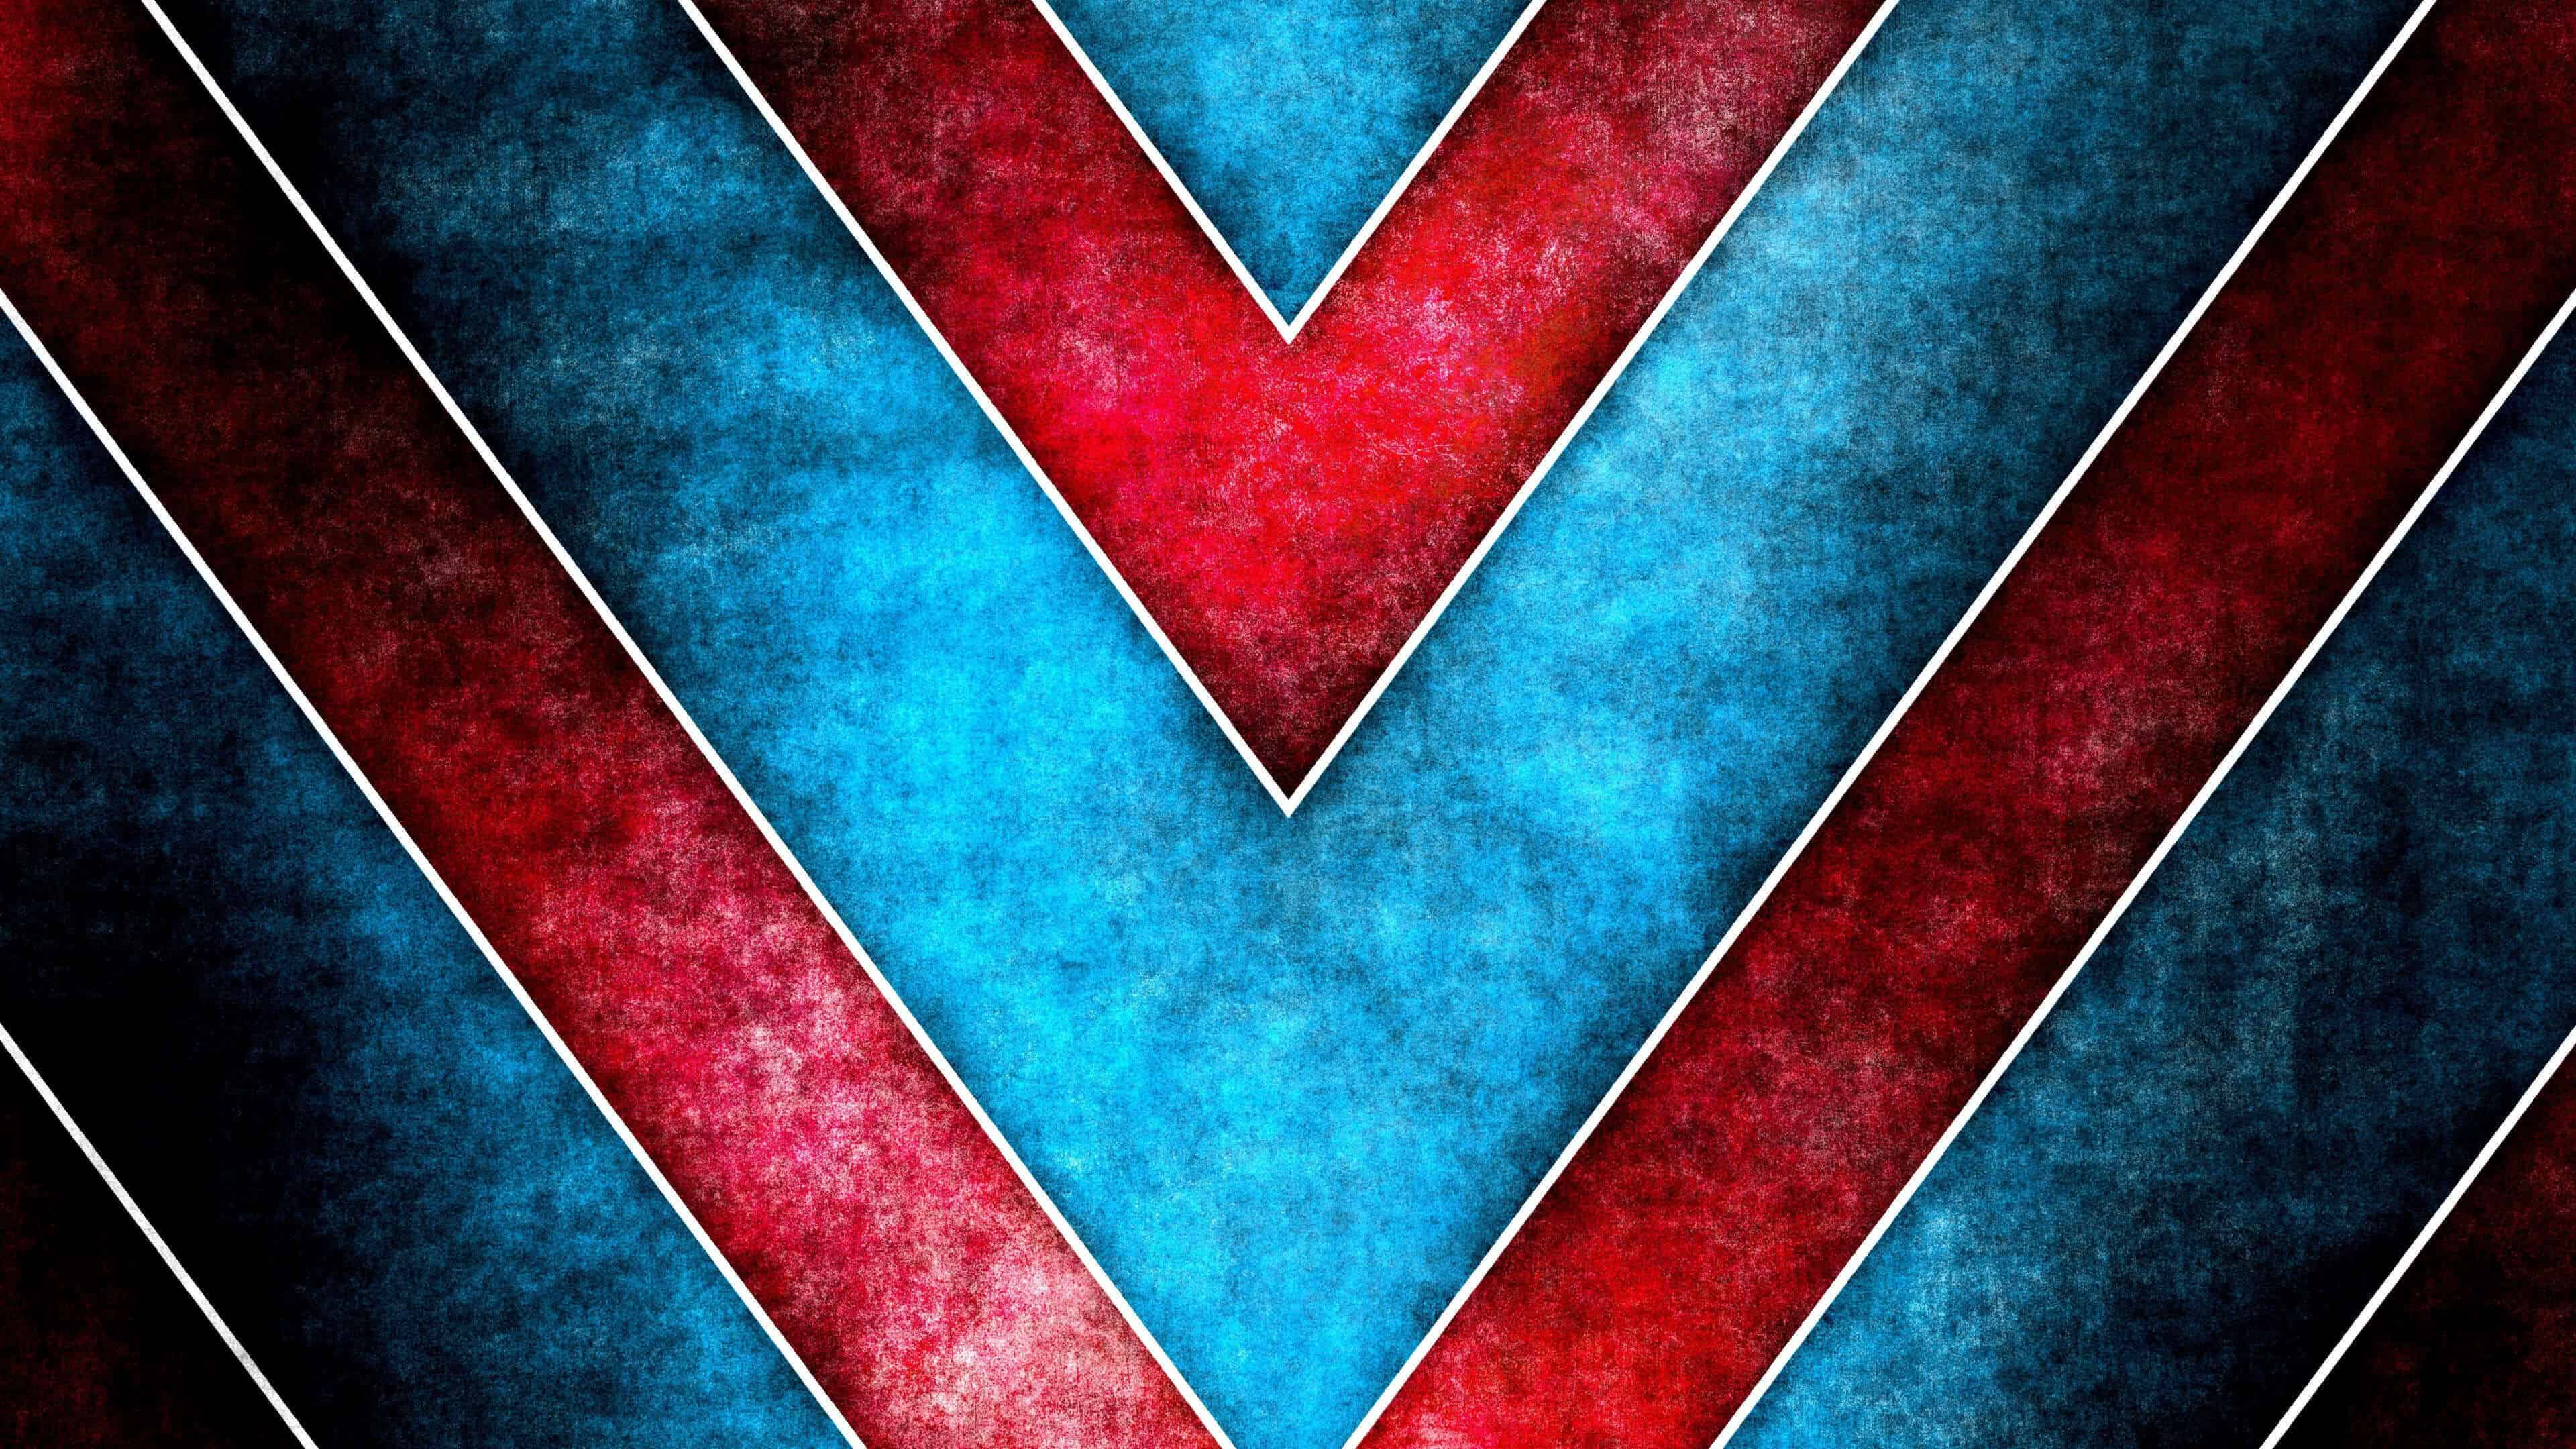 Red and Blue Triangle Logo - Red And Blue Triangle Pattern UHD 4K Wallpaper | Pixelz